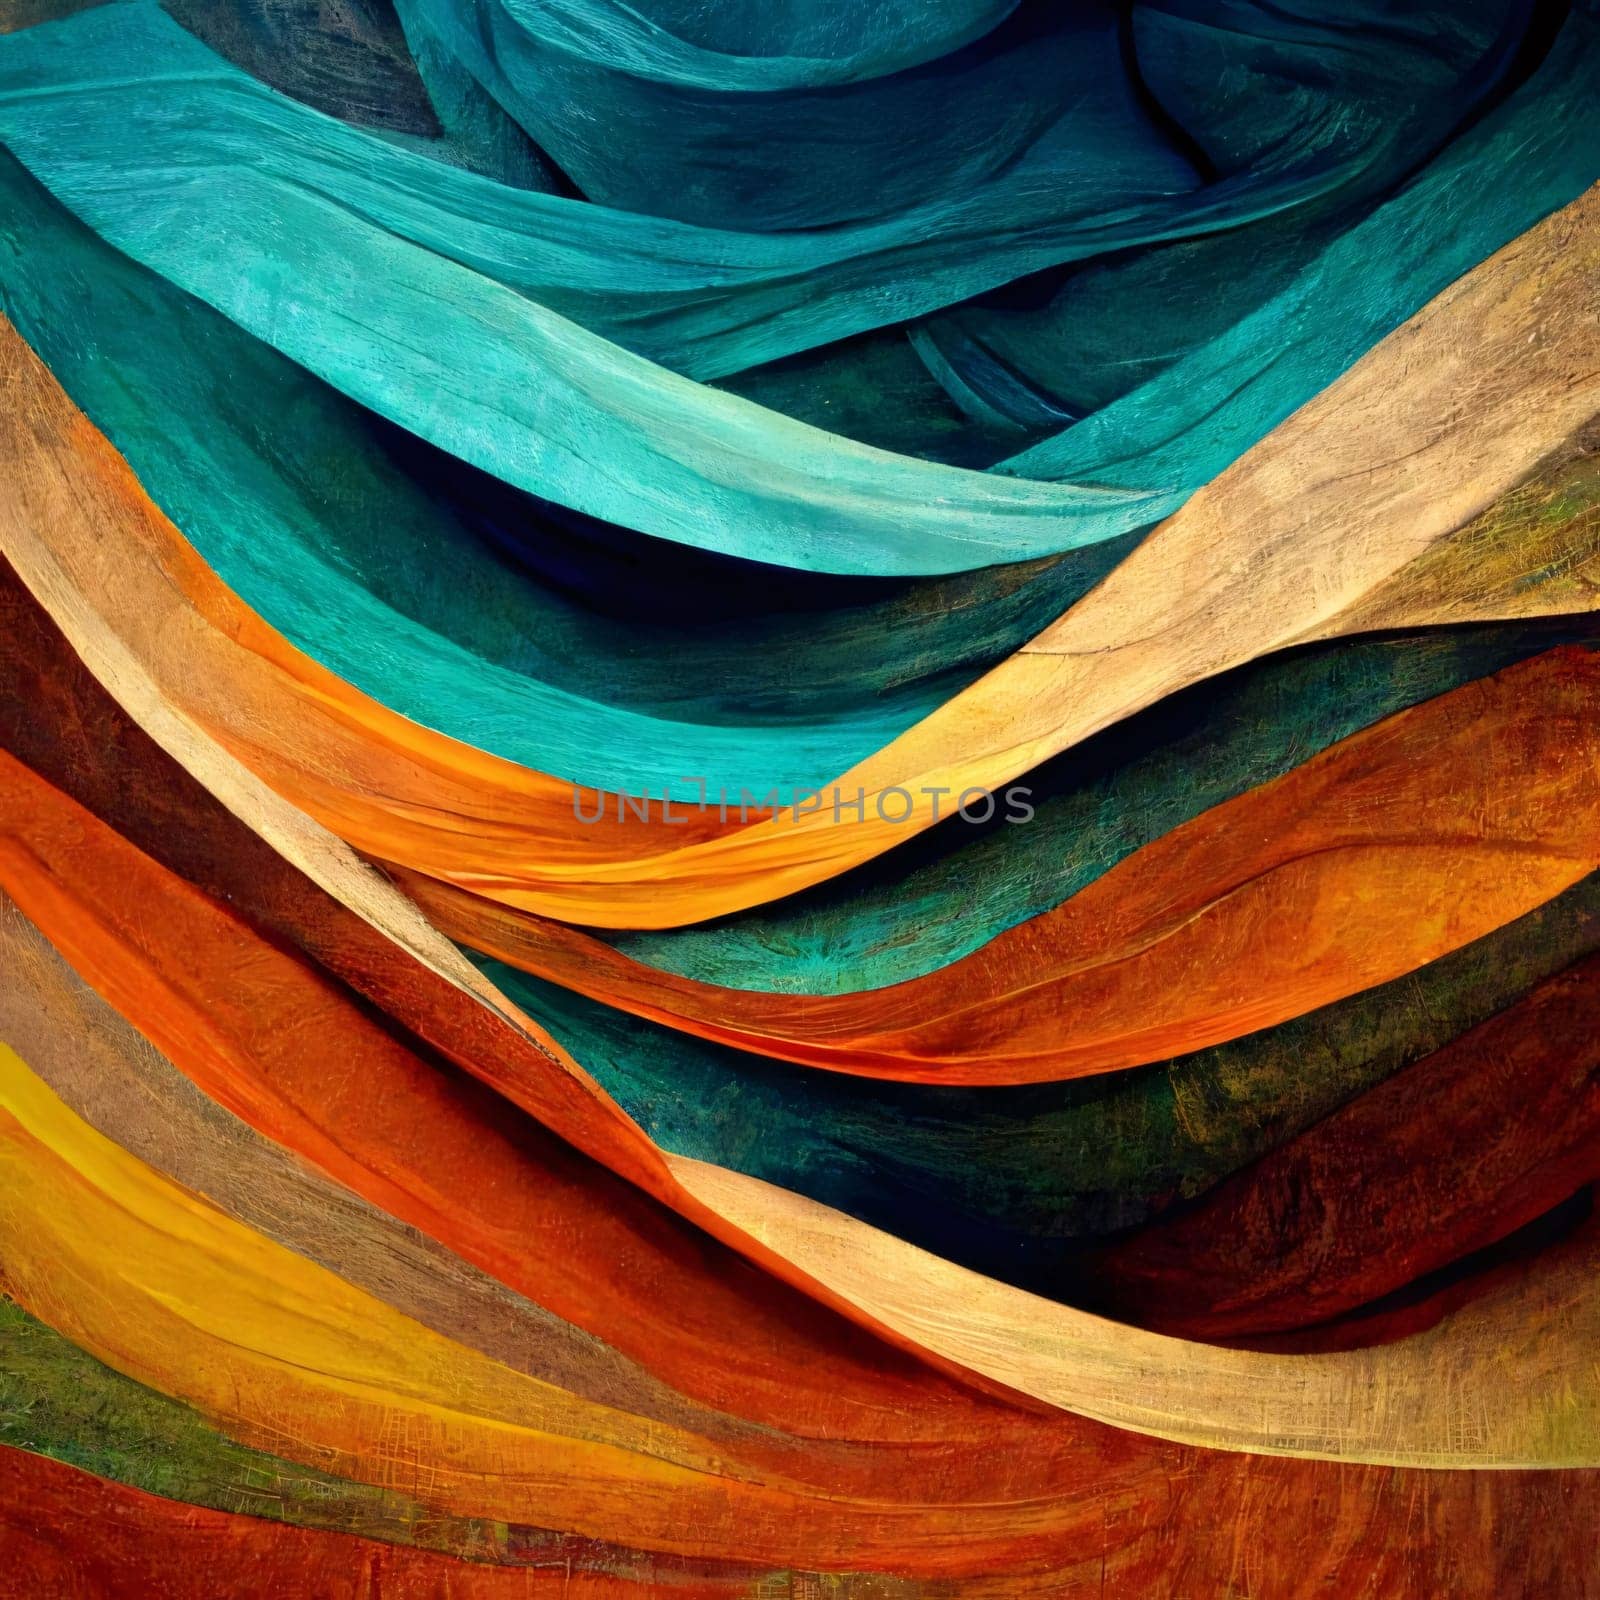 Abstract background design: colorful abstract background with textured paper layers and grunge textures